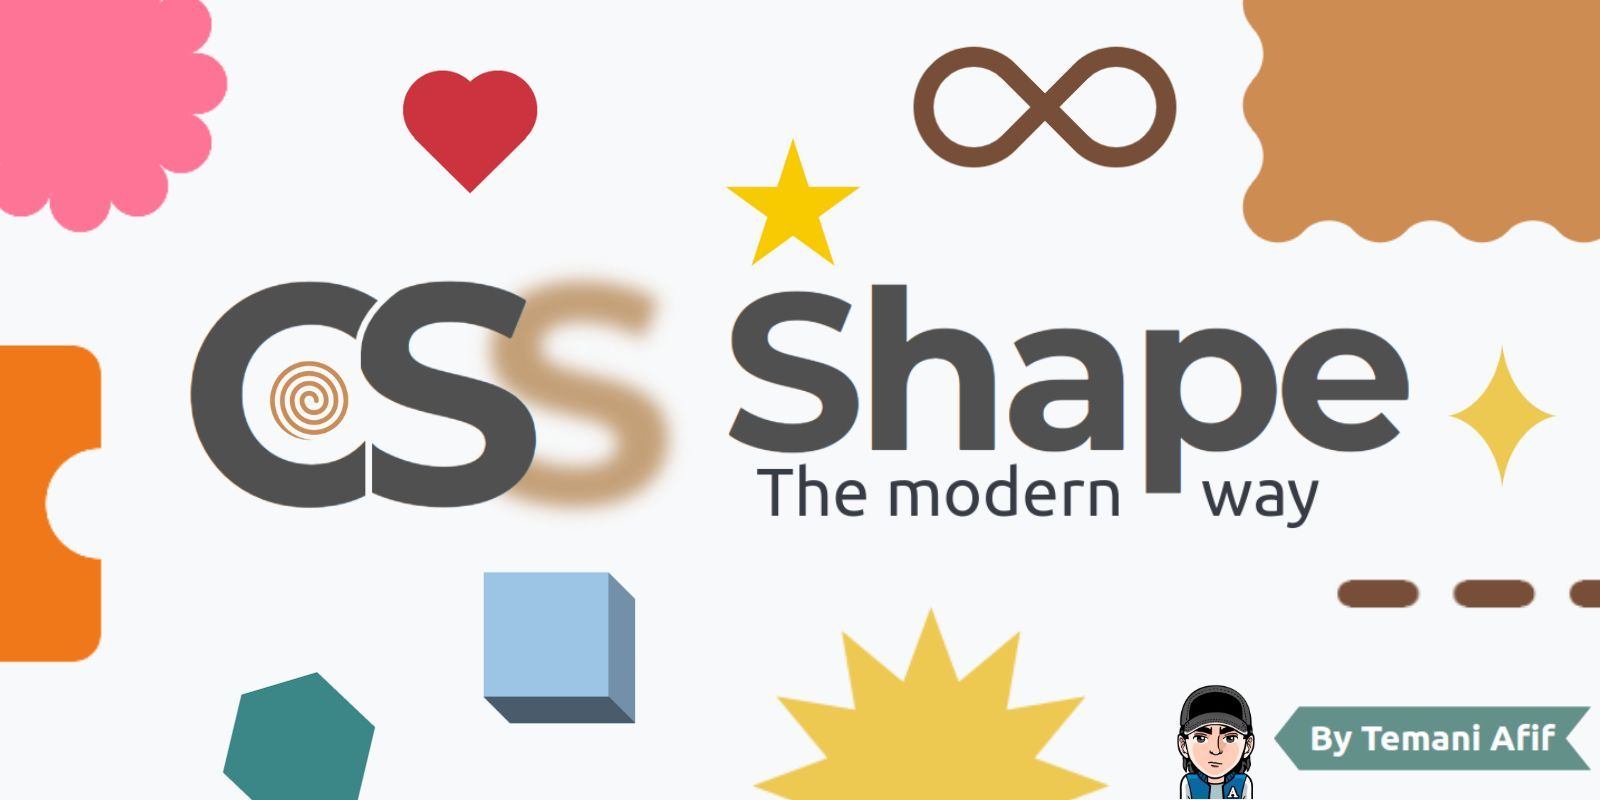 CSS Shapes The modern way